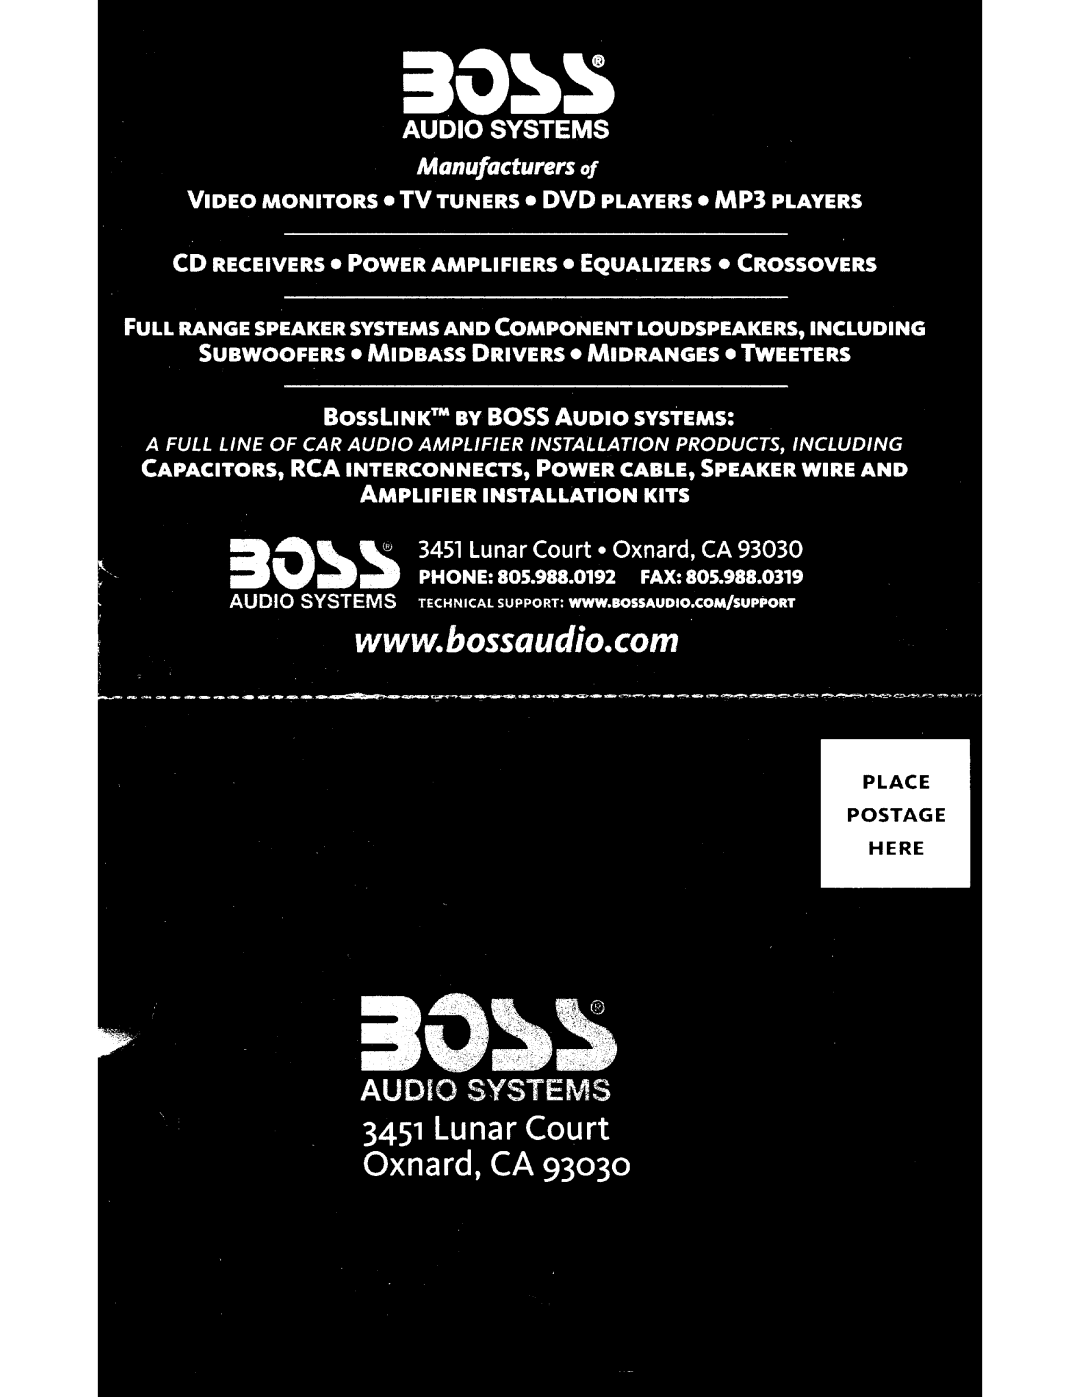 Boss Audio Systems MC450 user manual Place Postage Here 